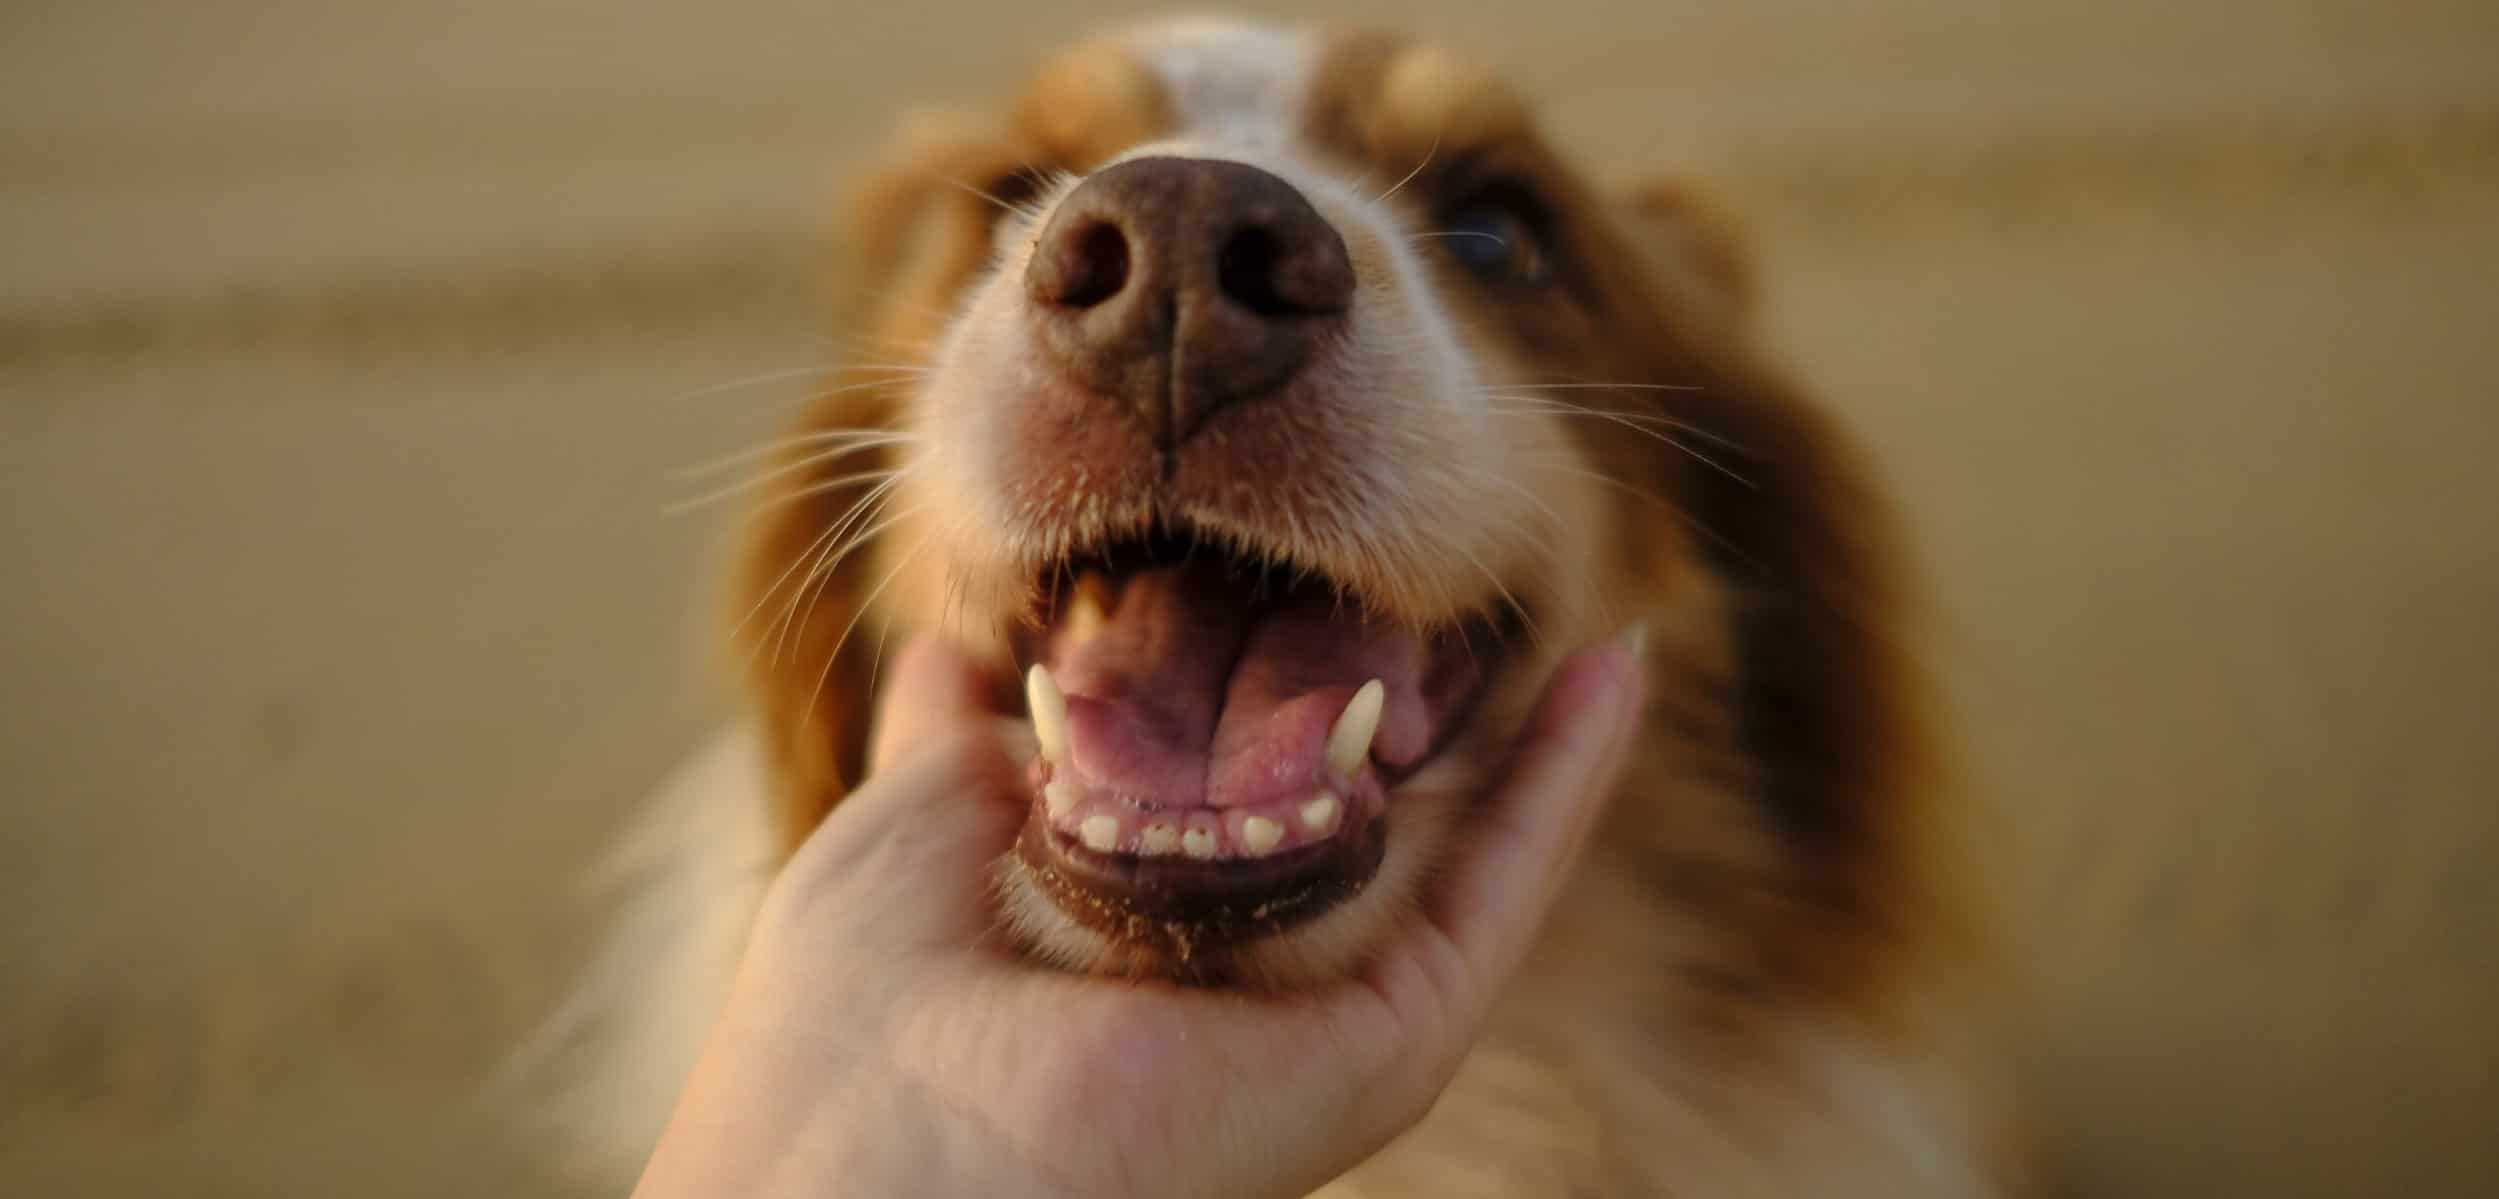 Brown and white dog in close up photography